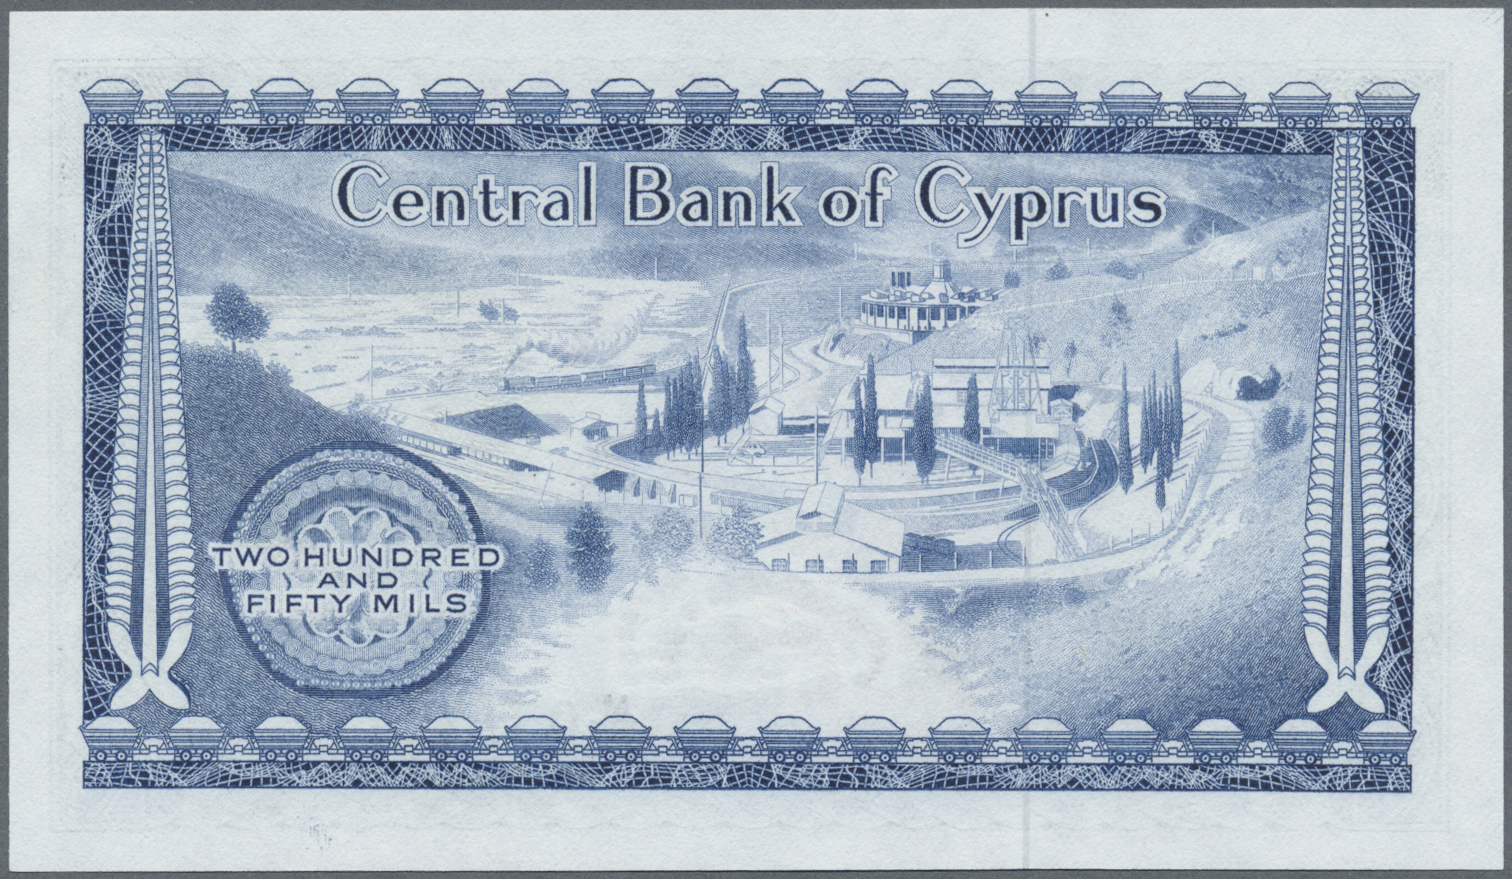 00620 Cyprus / Zypern: Set Of 2 Notes Containing 250 Mils 1976 And 1 Pound 1978 P. 41c, 43c, Both In Condition: UNC. (2 - Cyprus